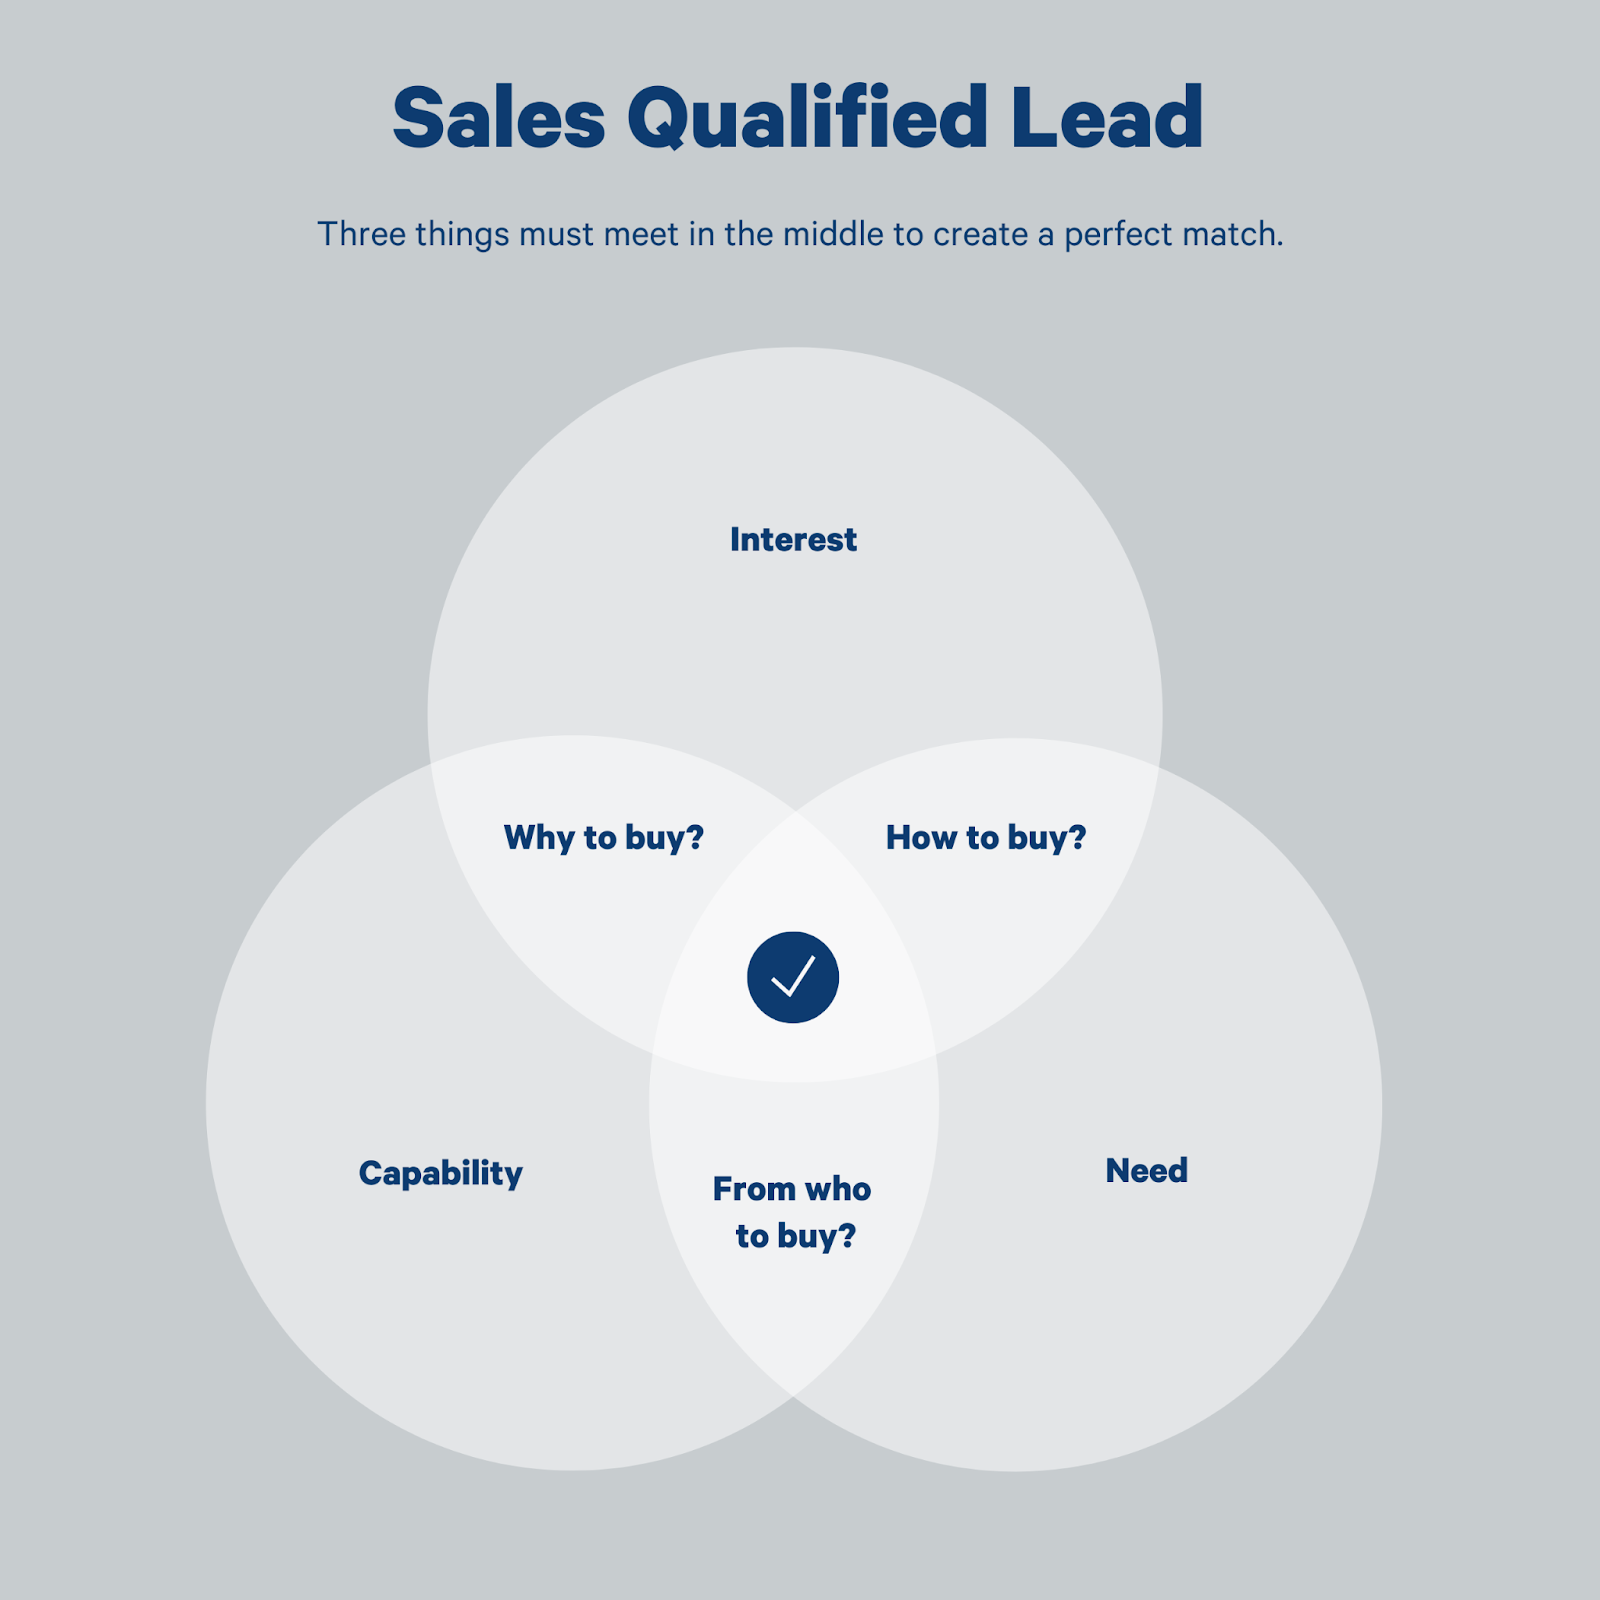 sales qualified leads